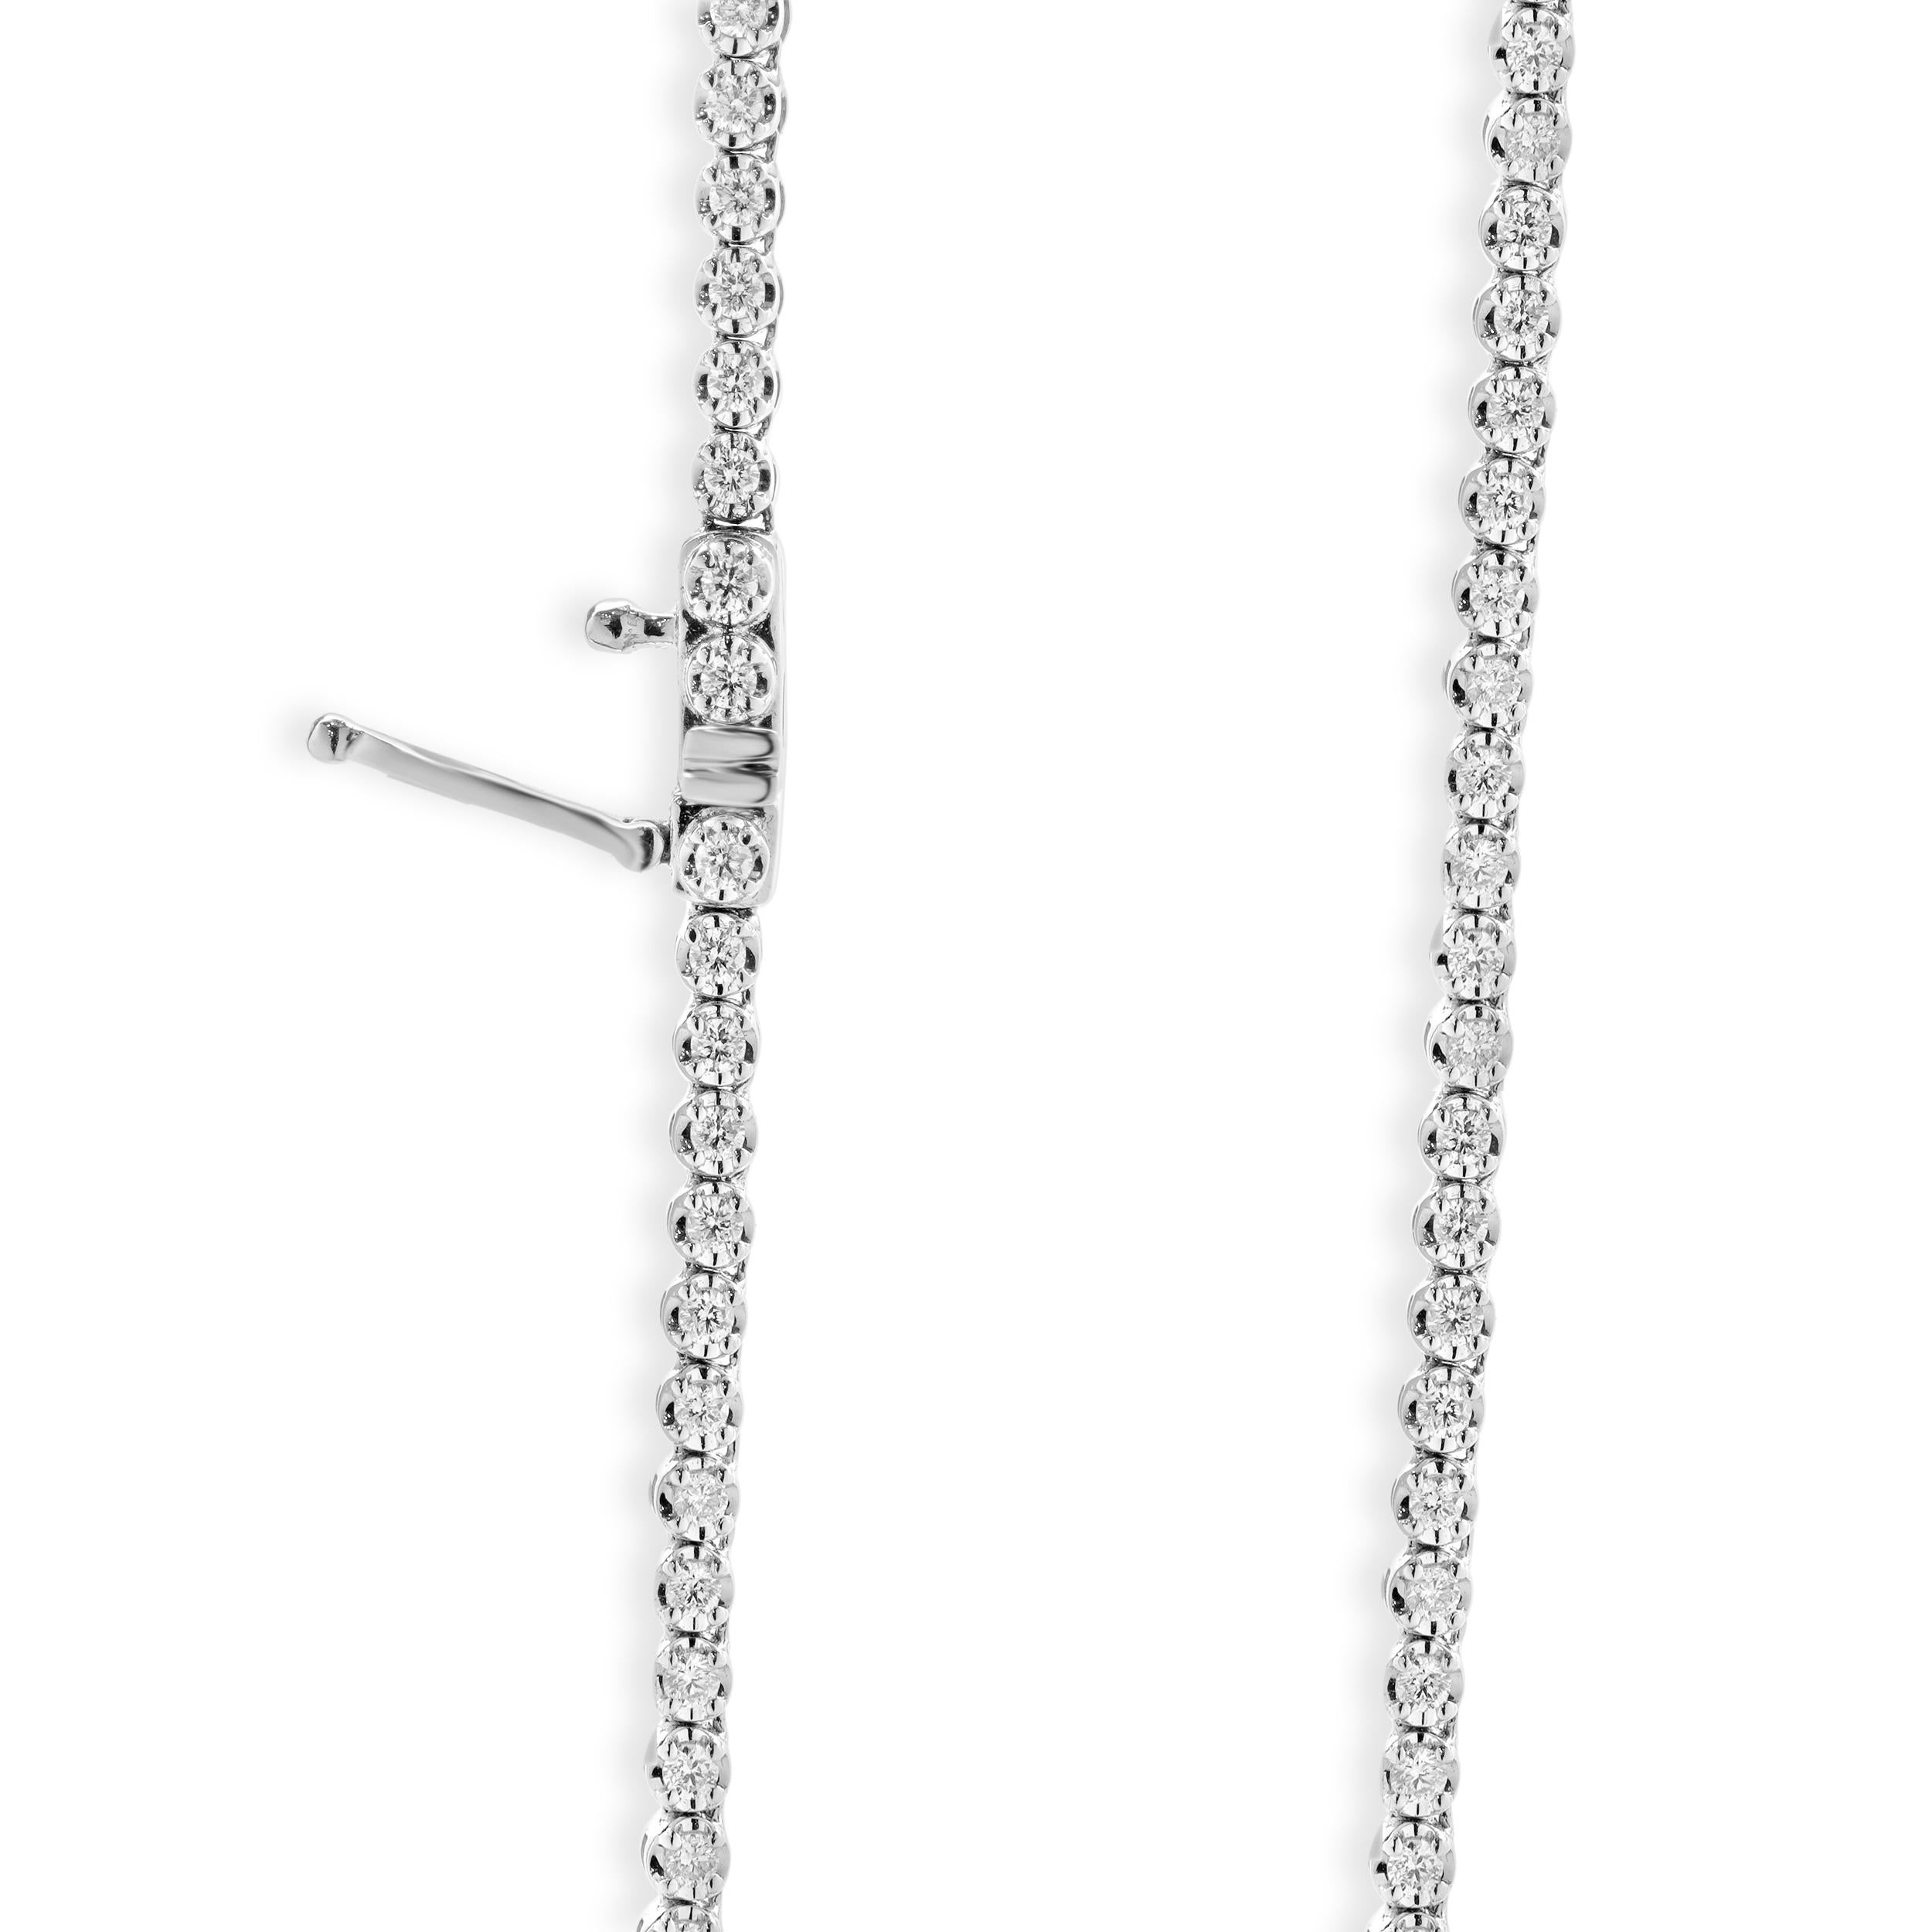 Designer: custom
Material: 14K white gold
Diamonds:  round brilliant Diamonds= 15.30cttw
Color: G
Clarity:VS-SI1
Dimensions: necklace measures 16.5-inches in length 
Weight: 28.15 grams
